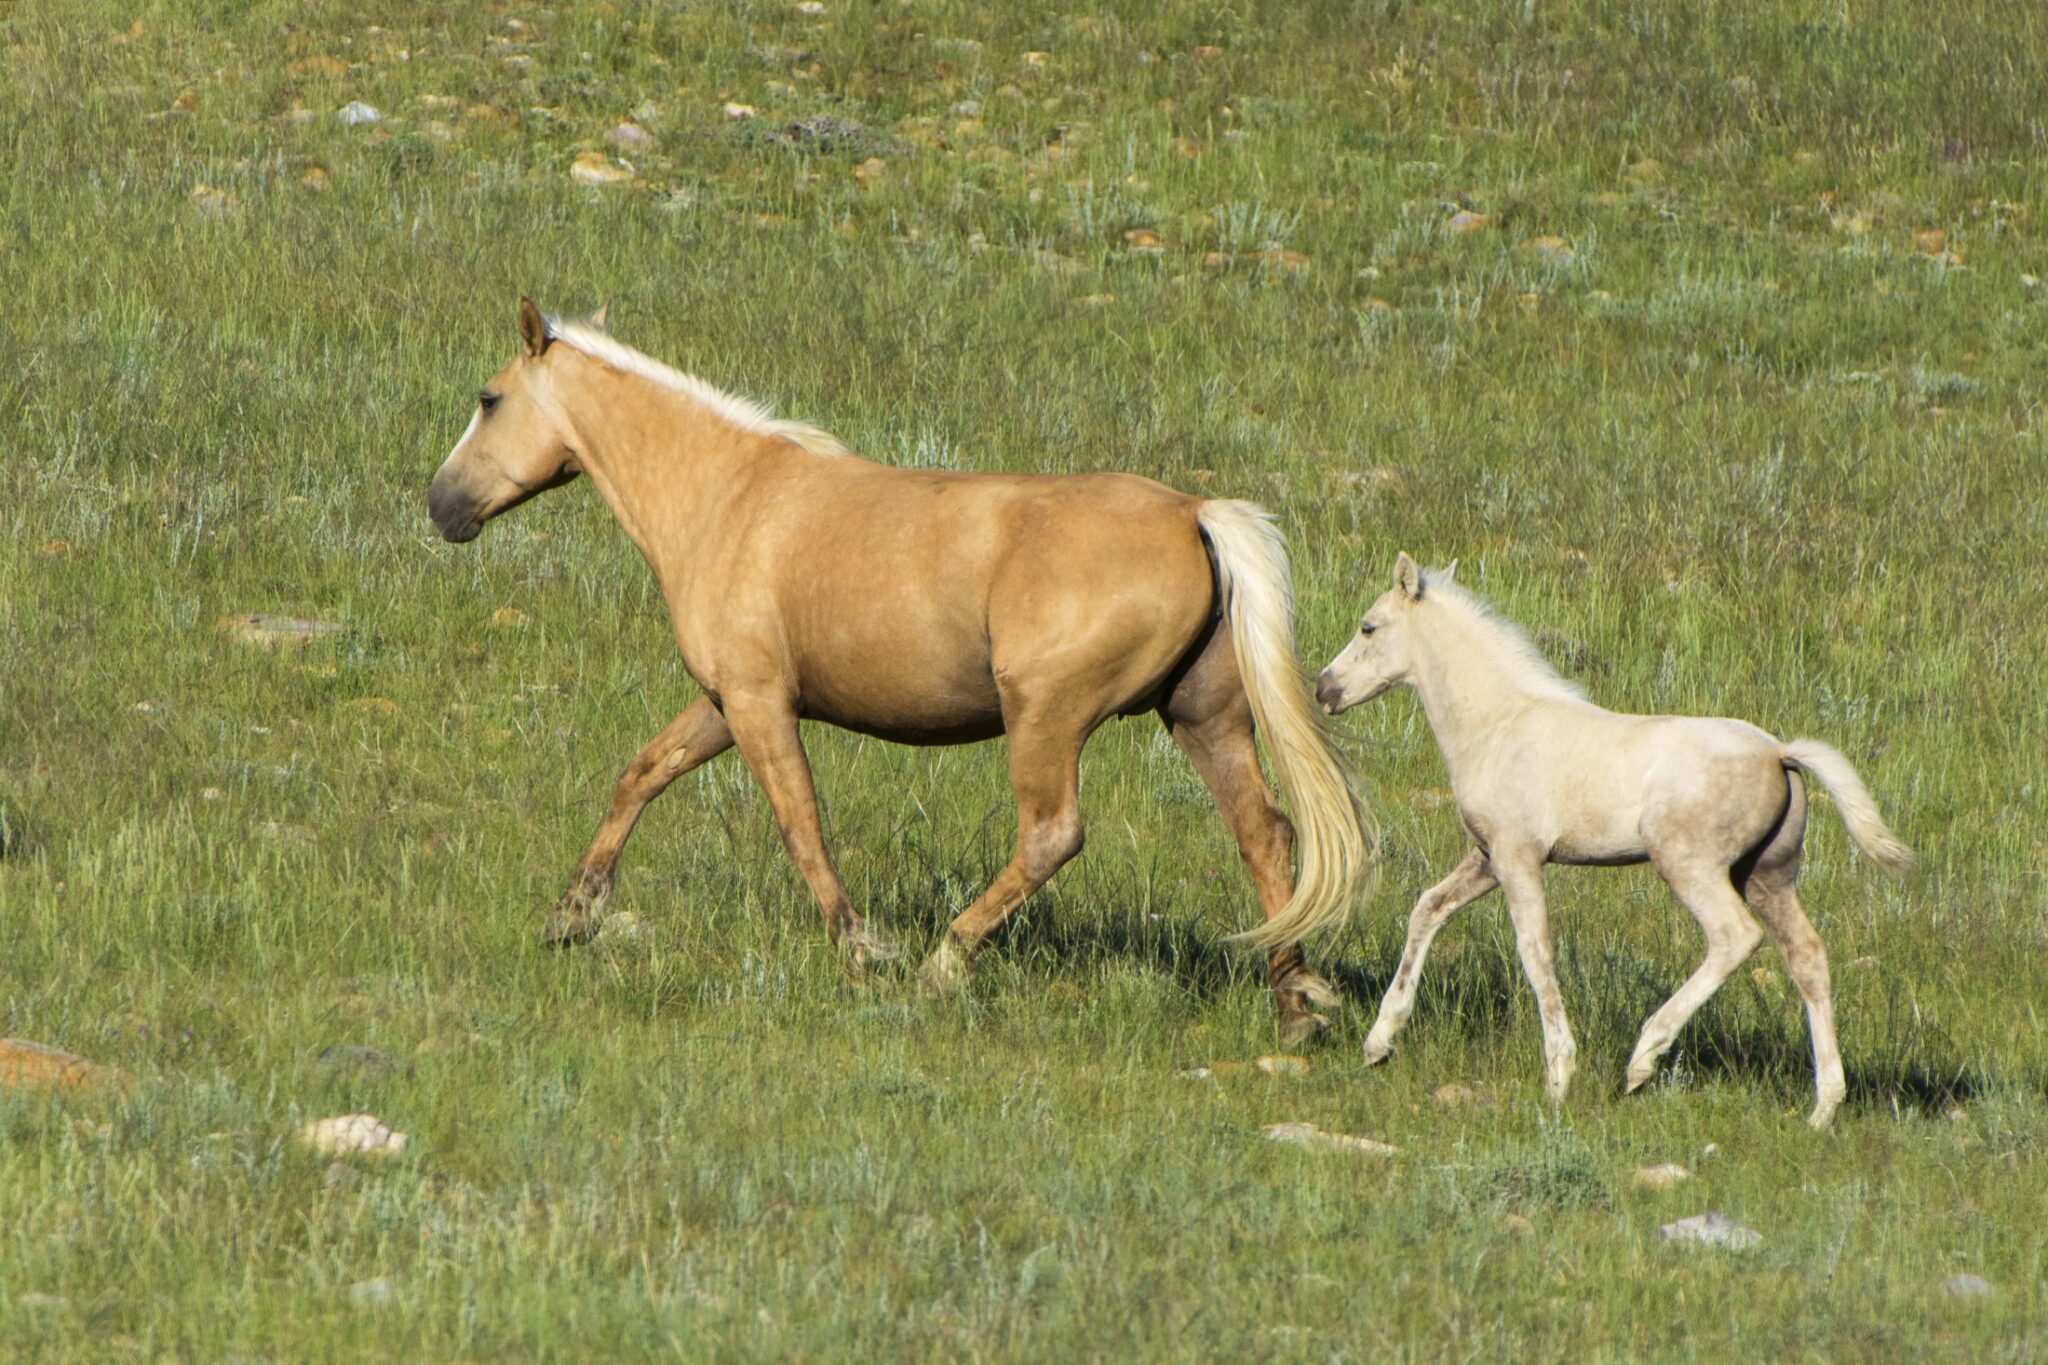 A foal with its mother running in a field